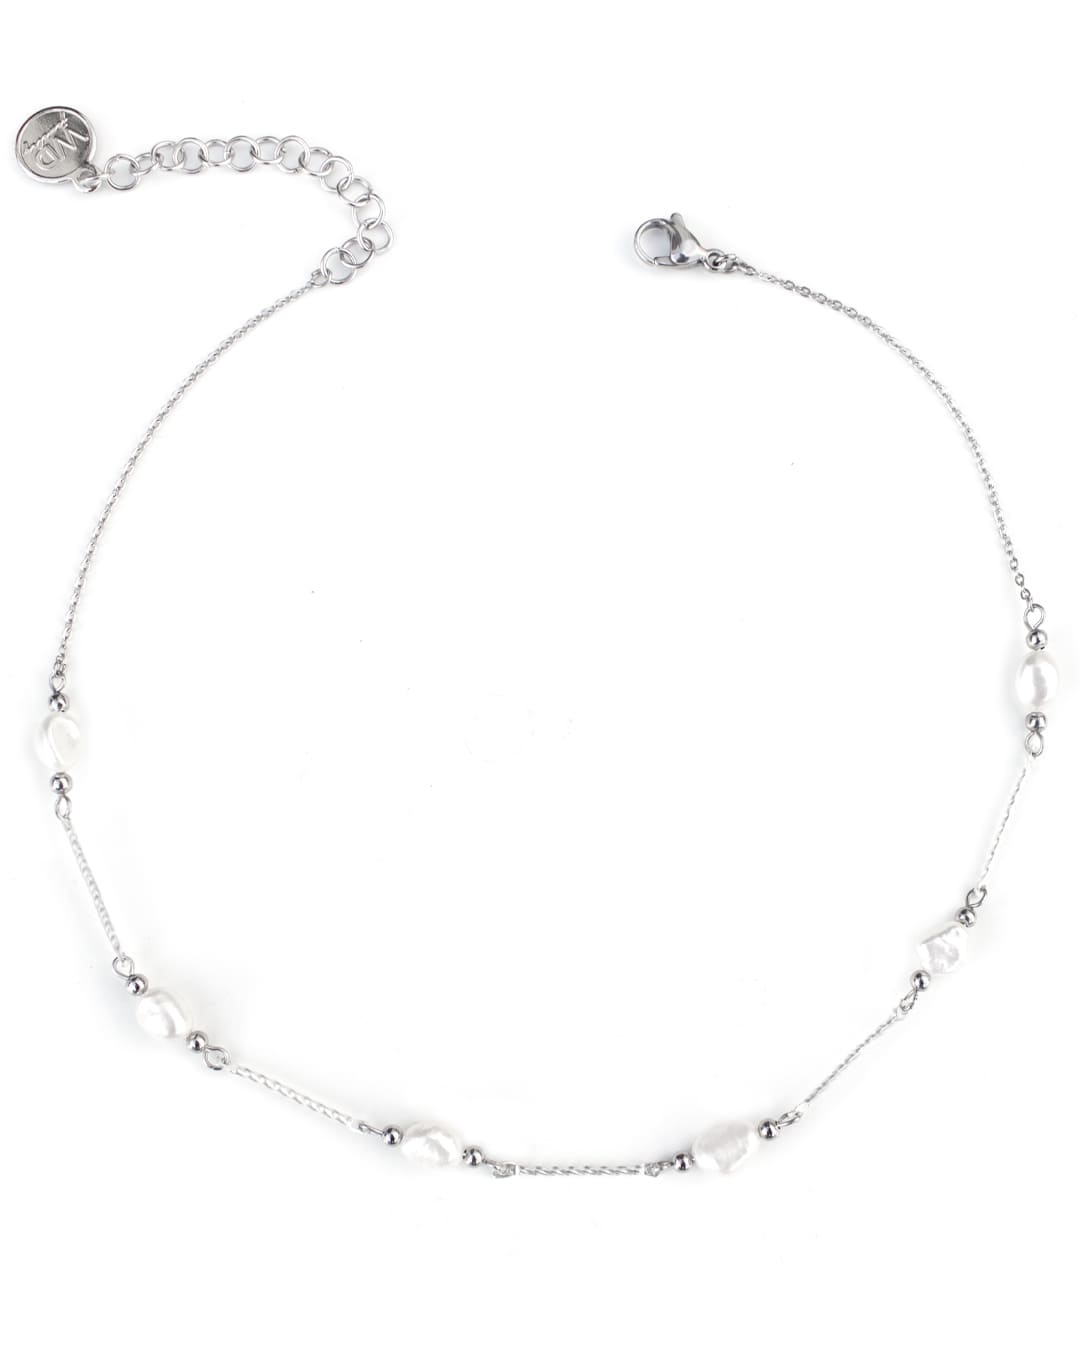 Coco collier argent